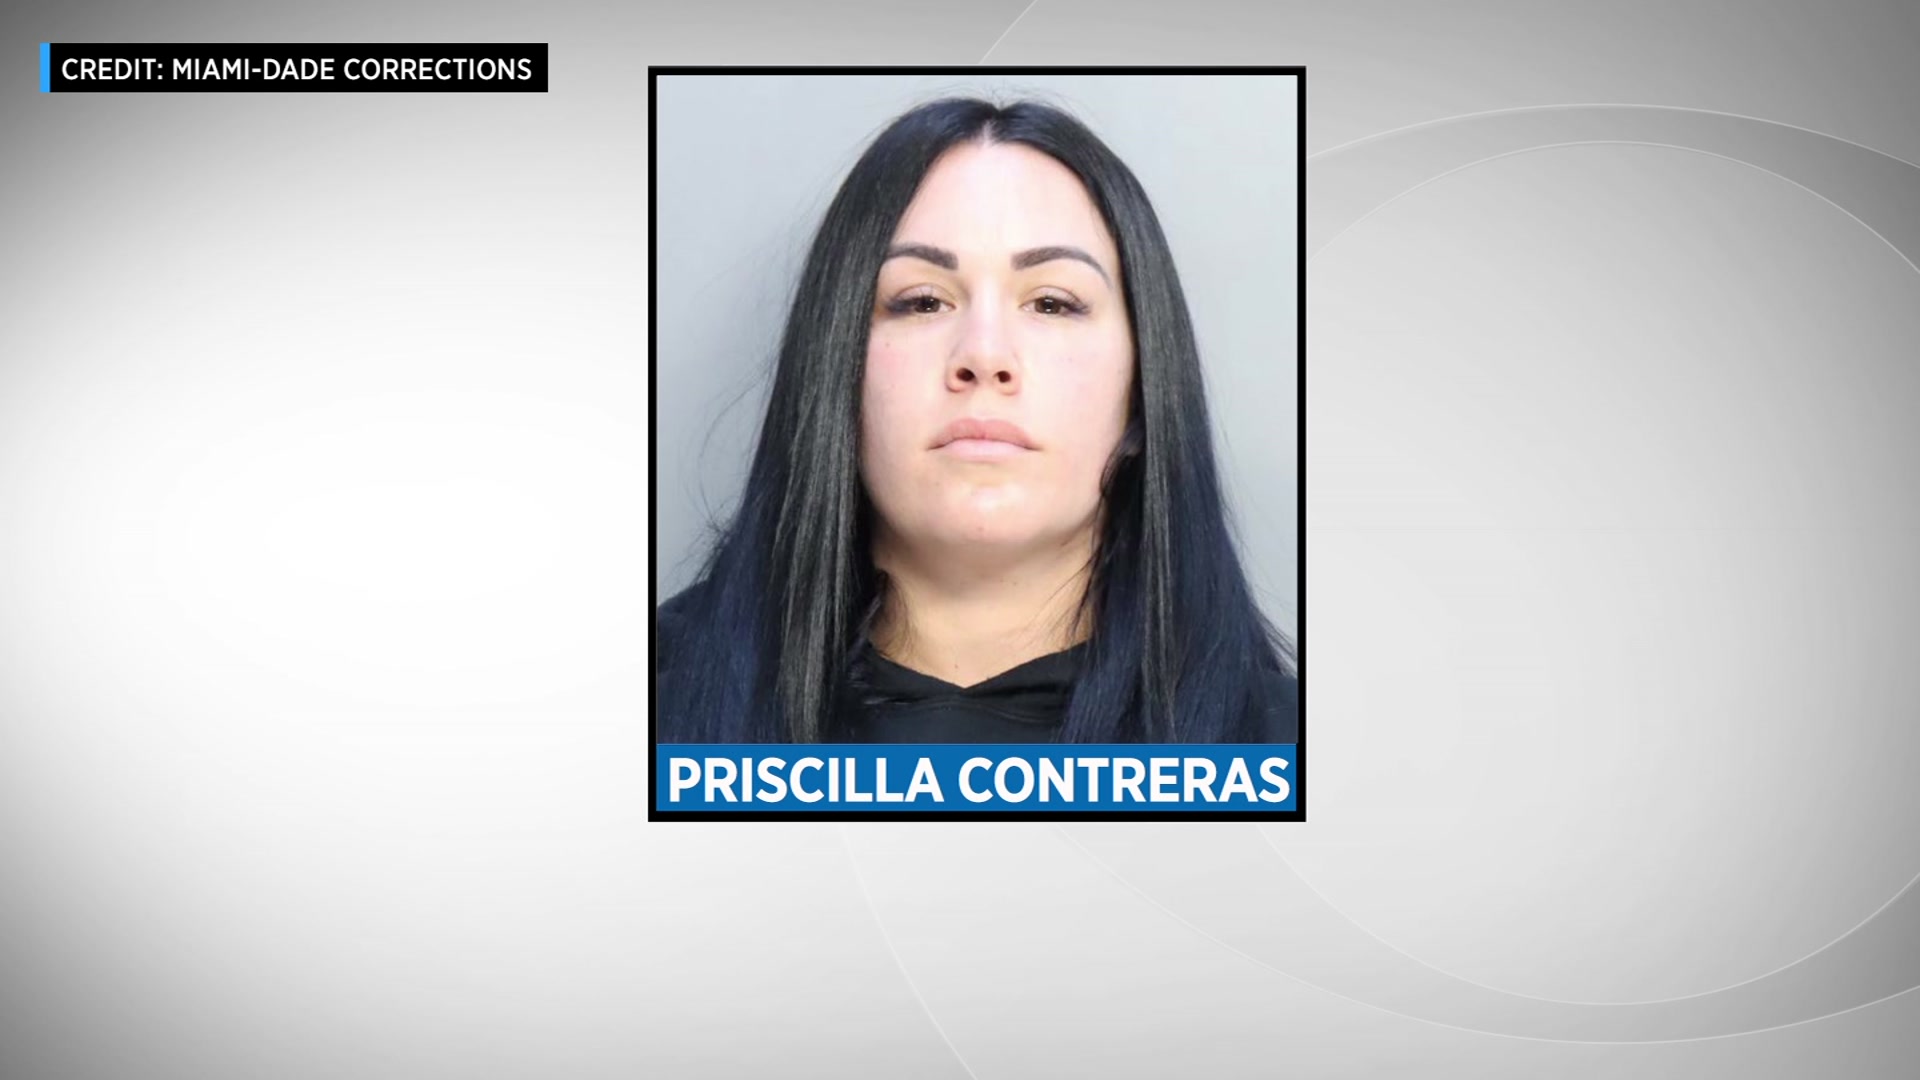 Woman Arrested For Defrauding Dozens In Real Estate Scam, 2 Accomplices On The Loose